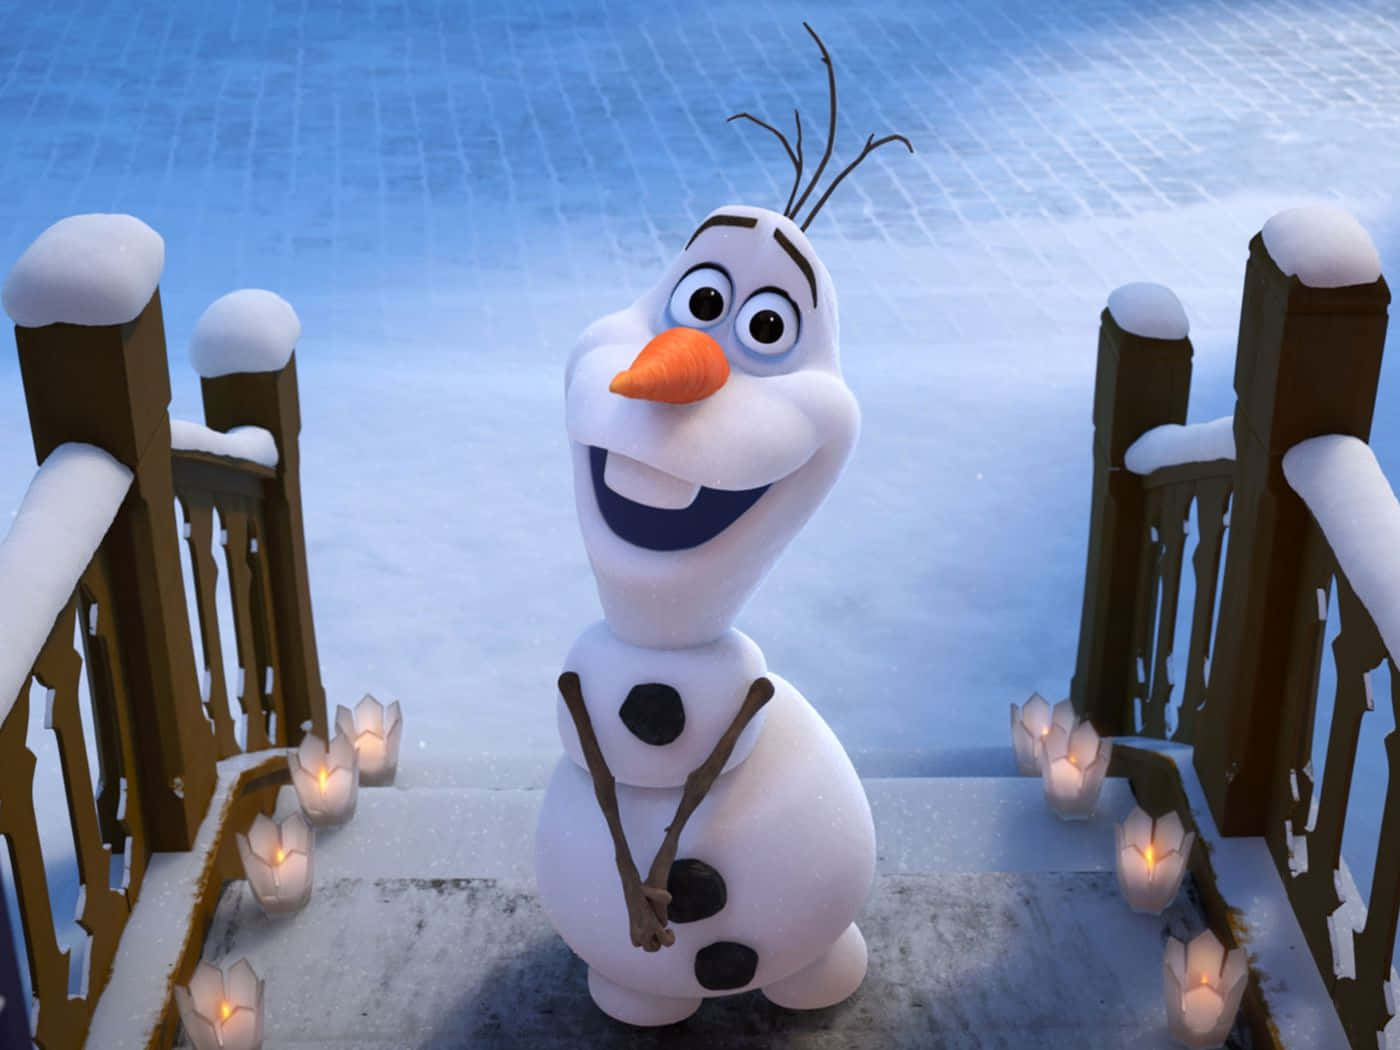 Olaf, the lovable snowman from Disney's Frozen